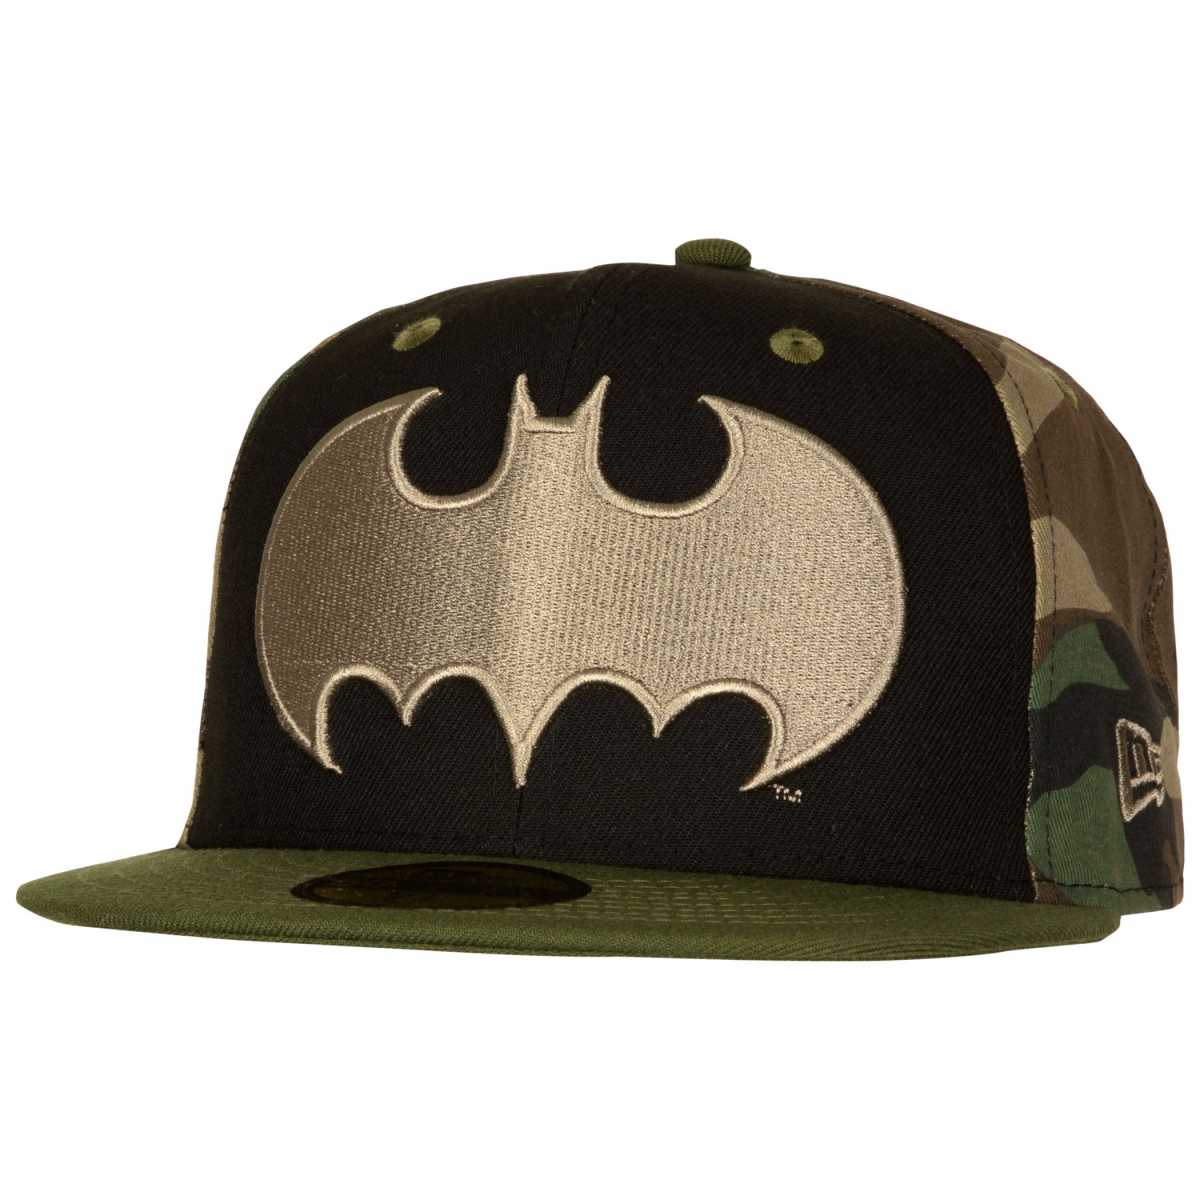 Picture of Batman 855153-73-4fitte Batman Camo Panel New Era 59Fifty Fitted Hat - 7.75 Fitted